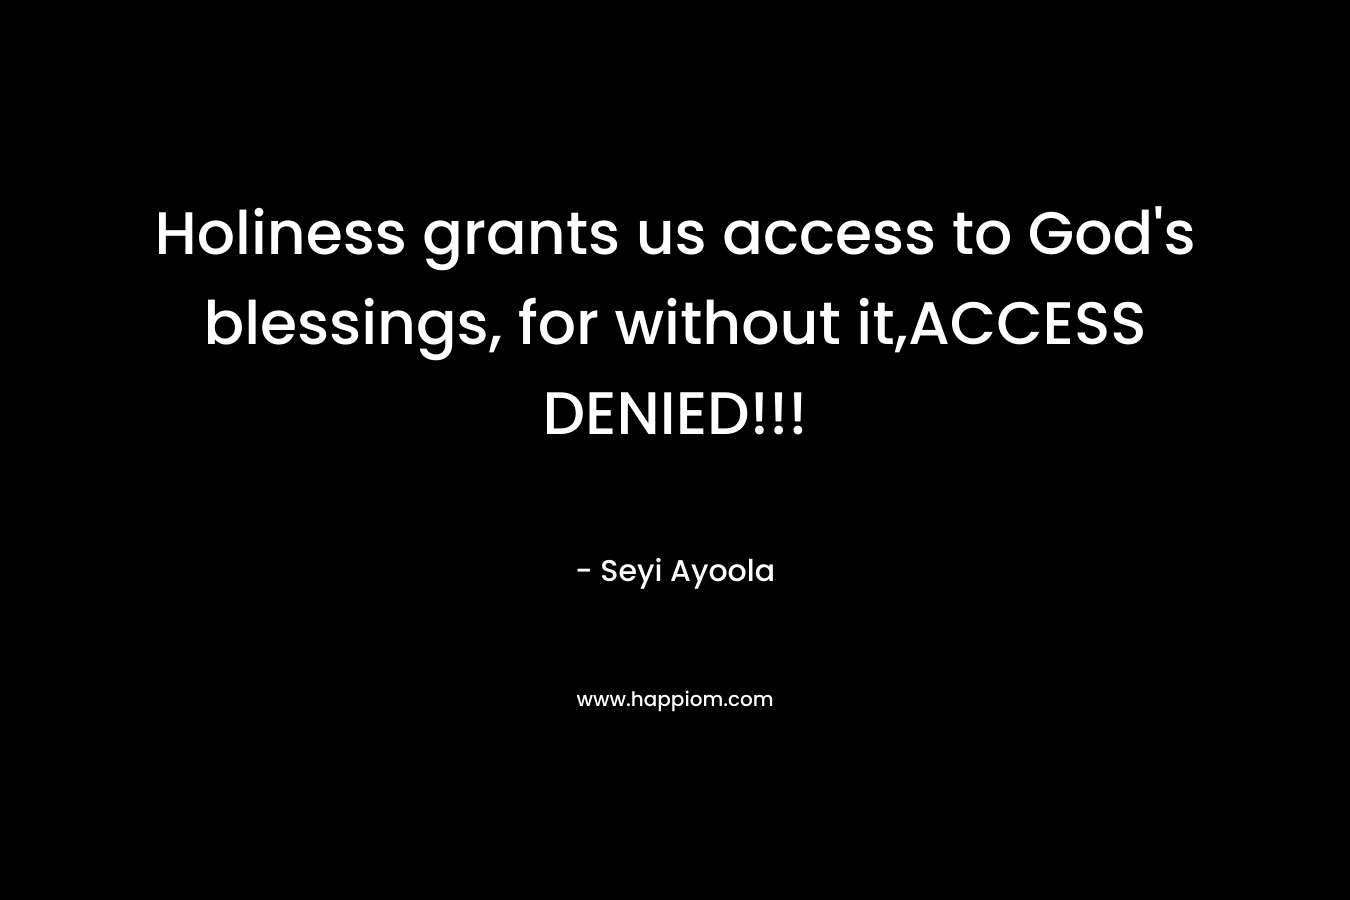 Holiness grants us access to God’s blessings, for without it,ACCESS DENIED!!! – Seyi Ayoola